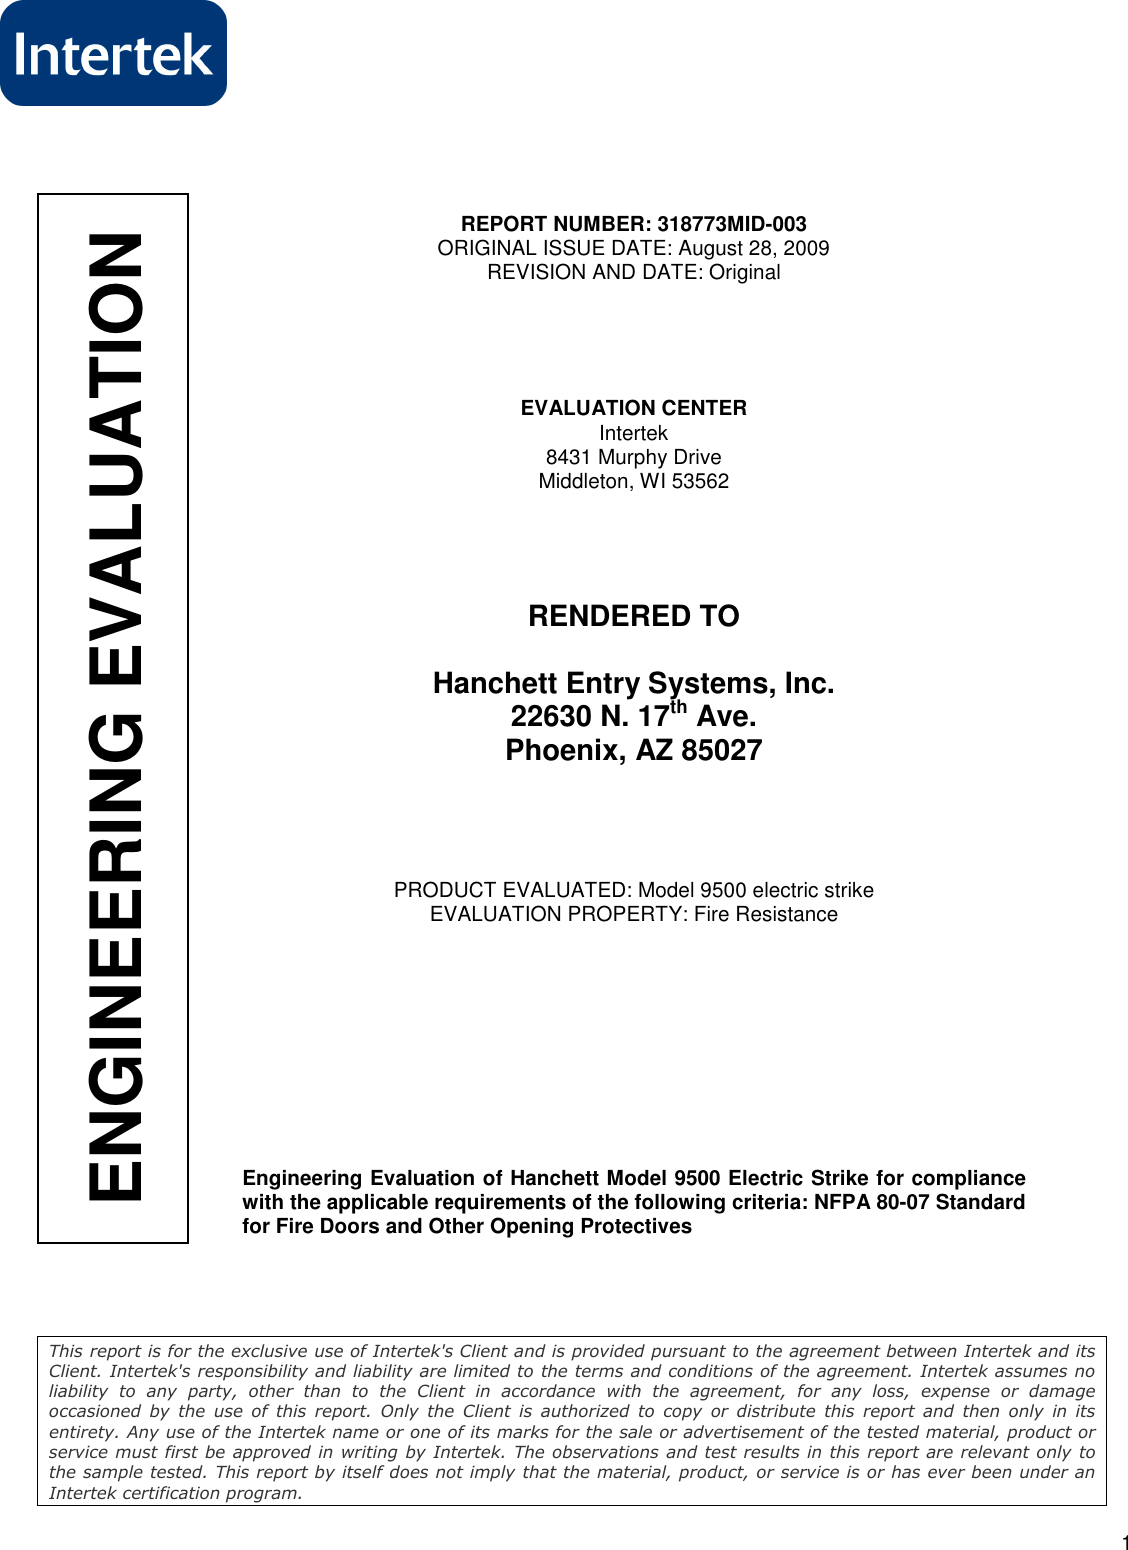 Page 1 of 5 - HES EEV 9500 Series Compliance Sustainability NFPA-80-07